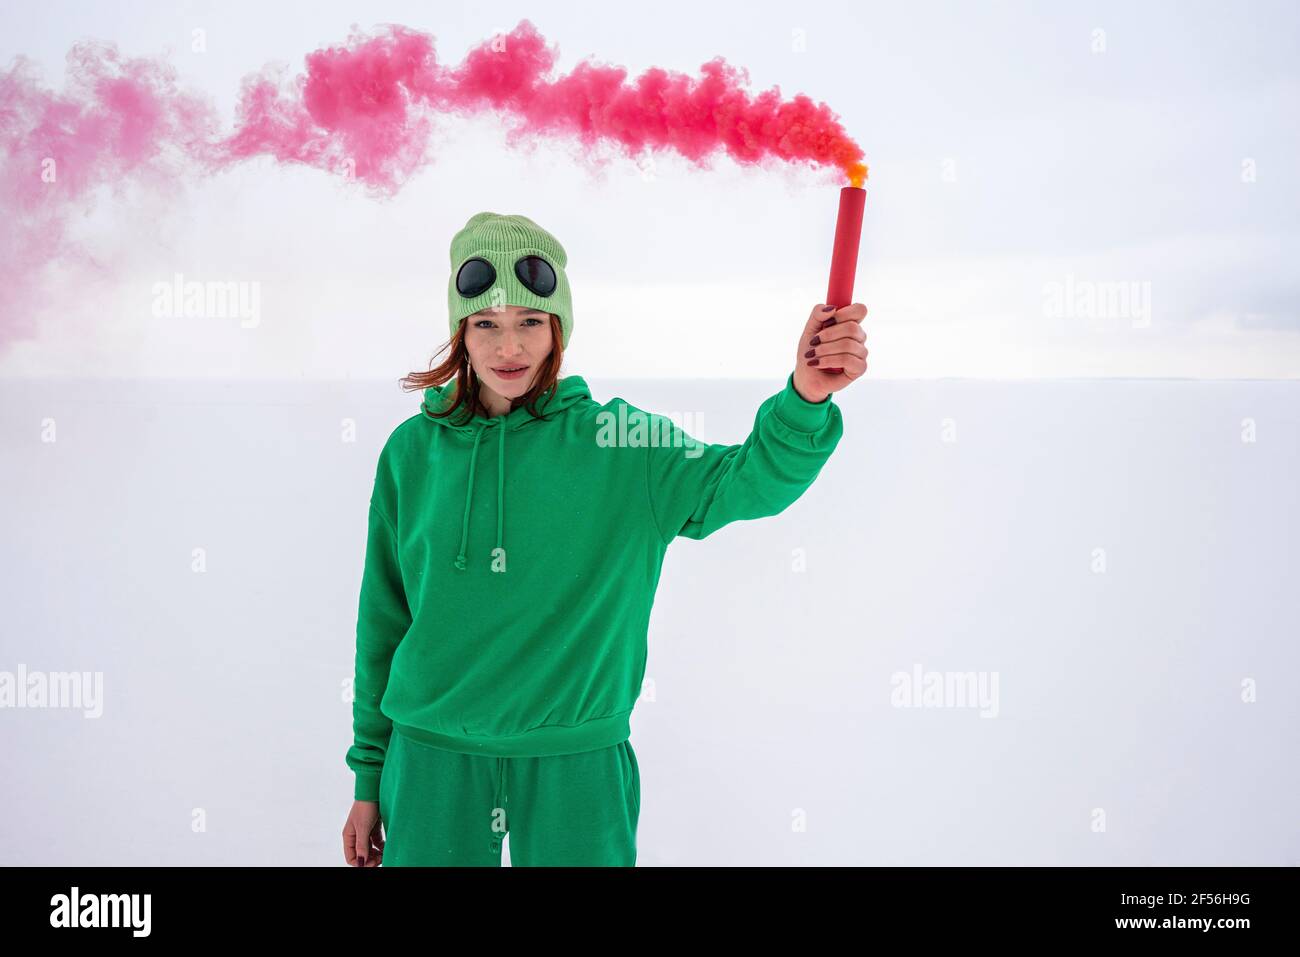 Woman holding red smoke distress flare against sky Stock Photo